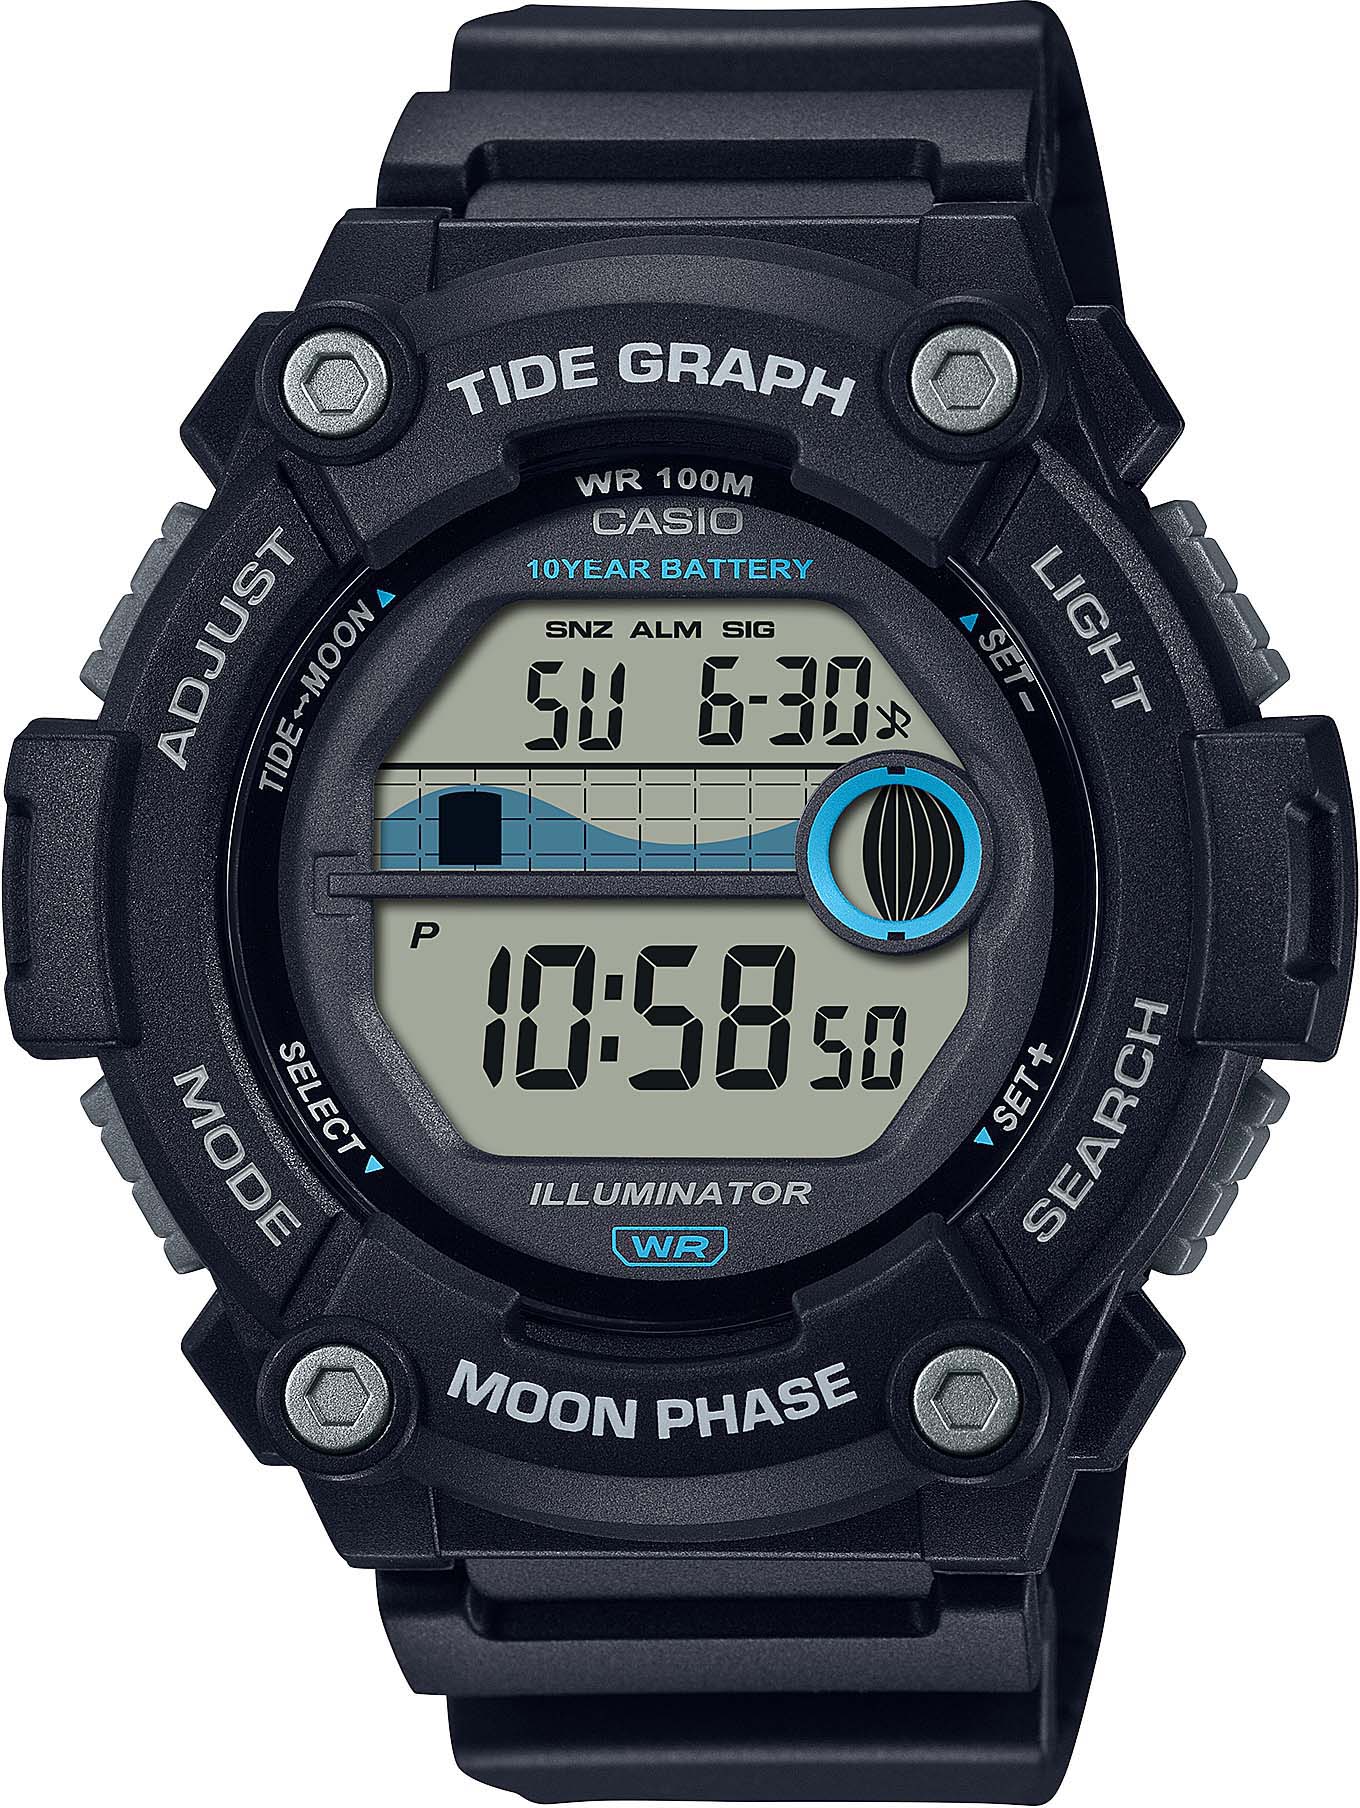 https://op2.0ps.us/original/opplanet-casio-outdoor-digital-fishing-watch-w-tide-and-moon-graph-10-year-battery-life-mens-black-one-size-ws1300h-1av-main